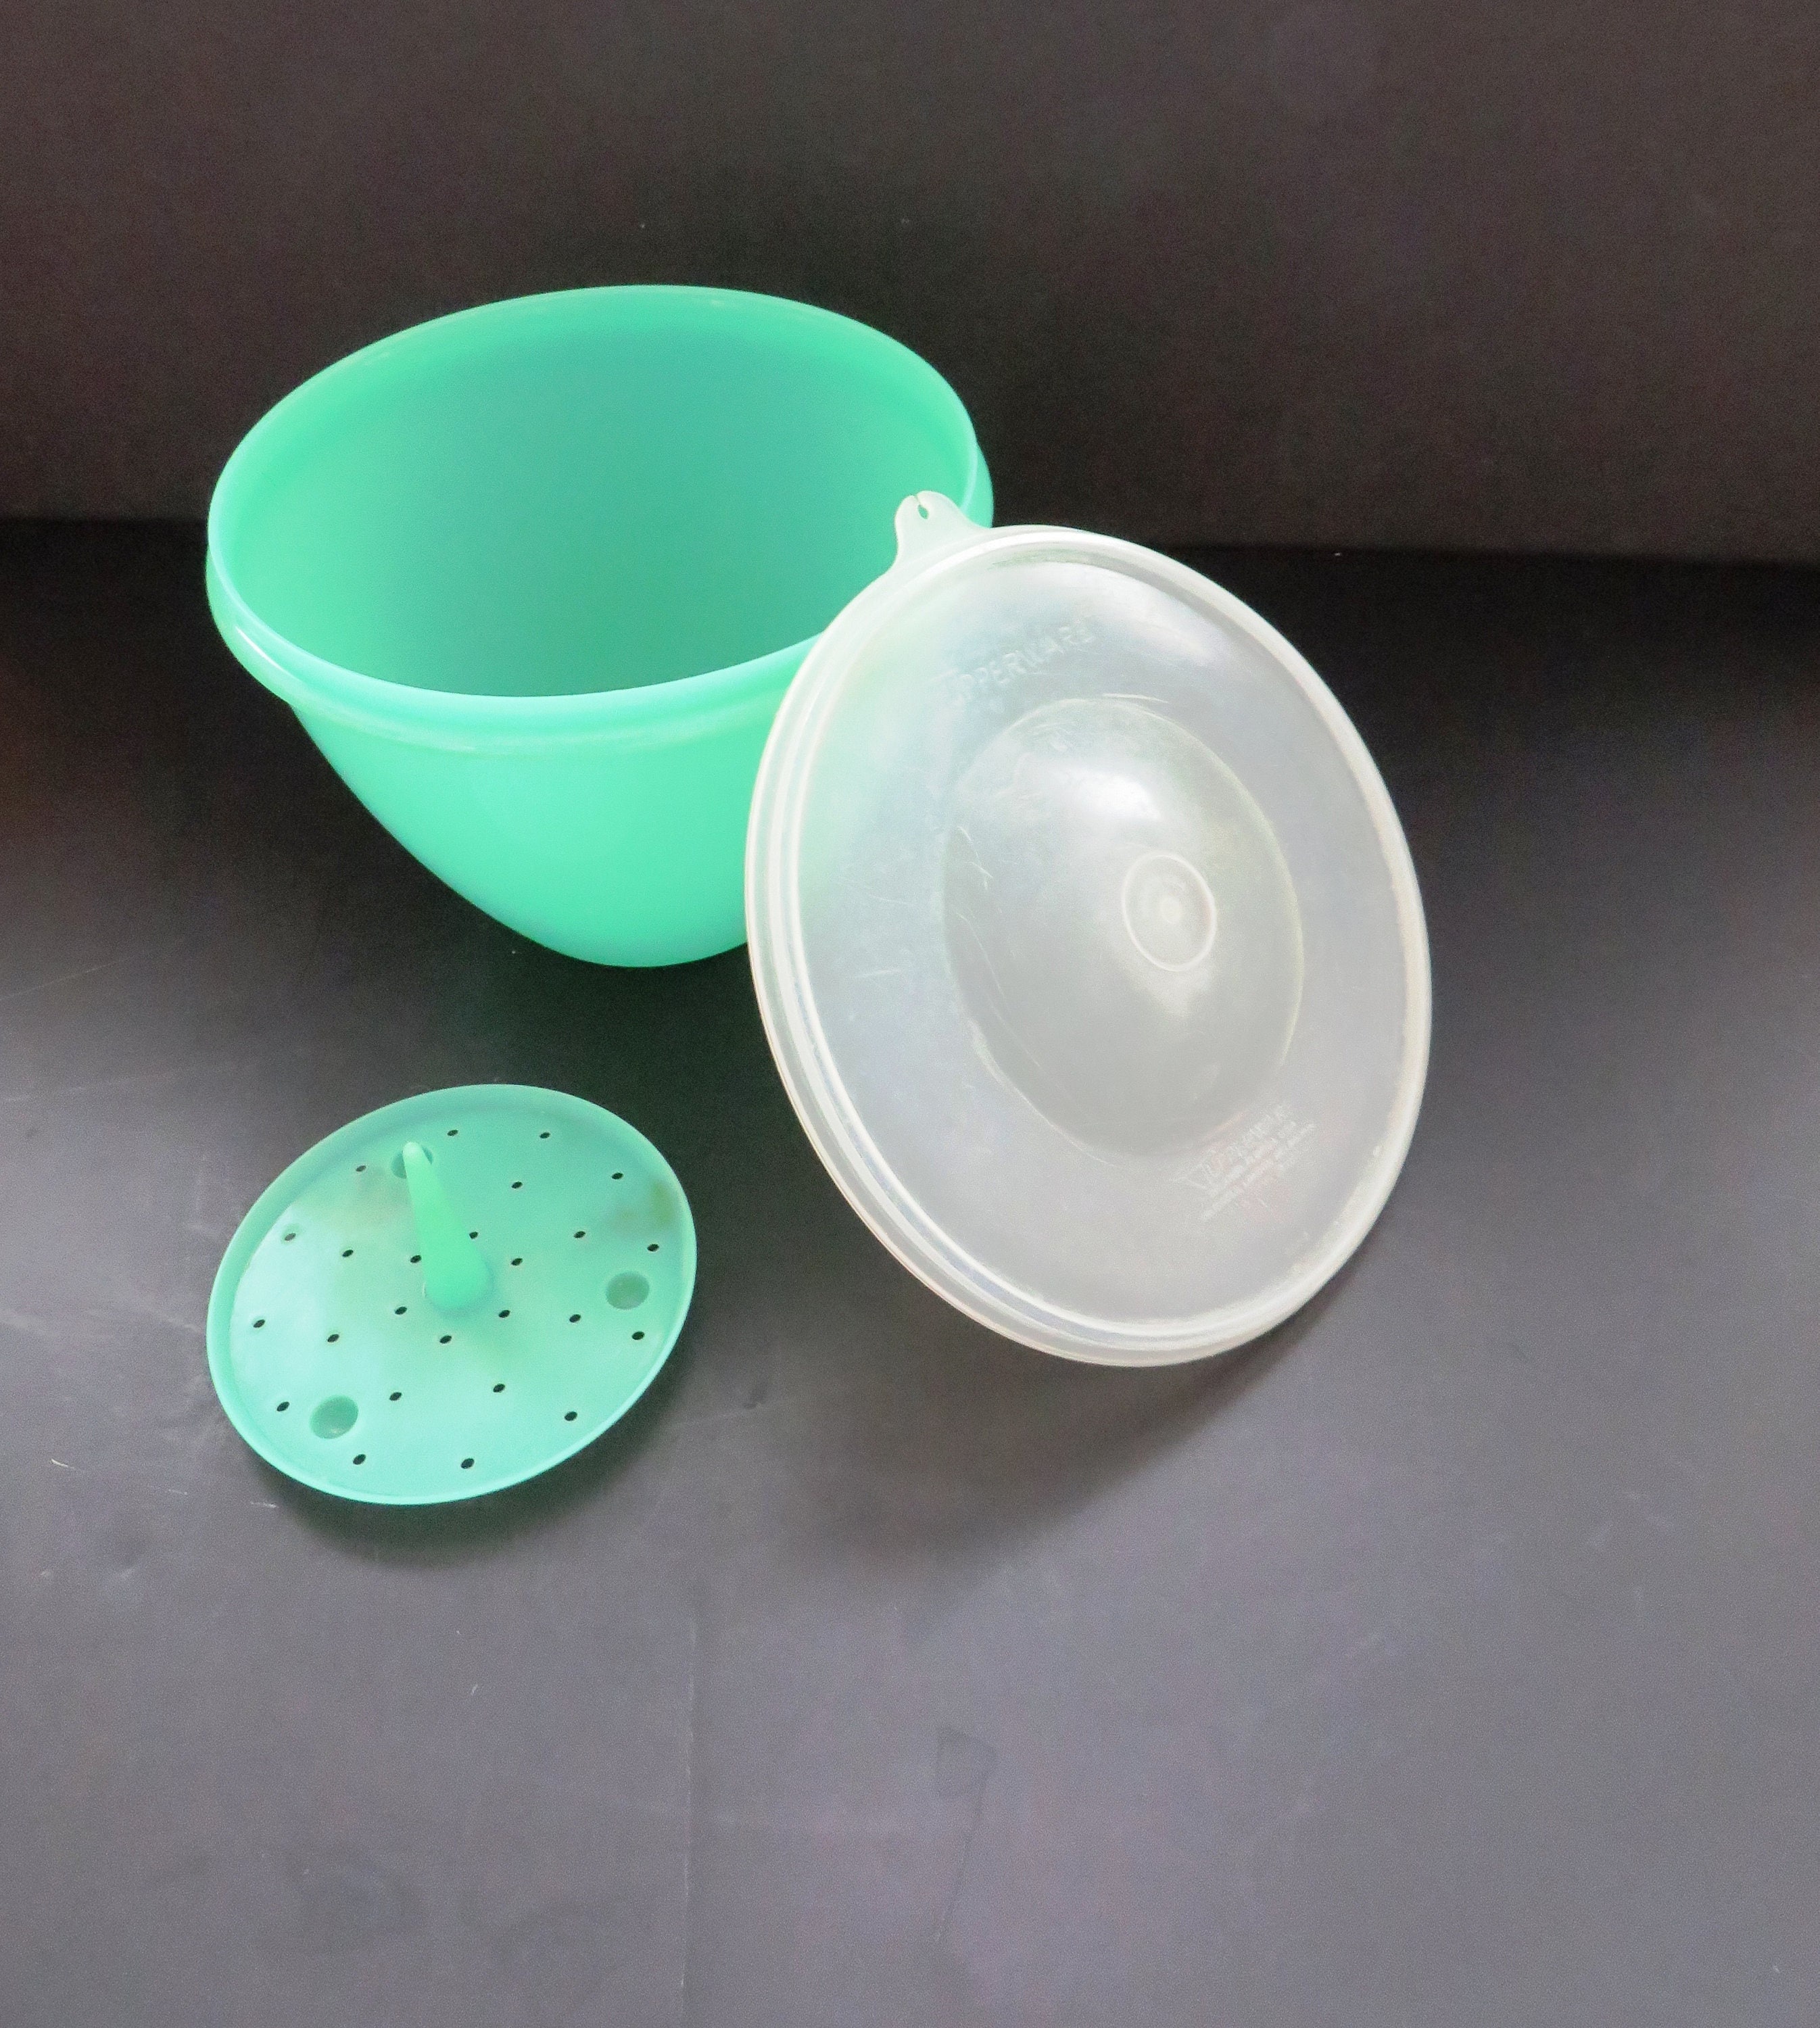 1970s Green Tupperware Lettuce Crisp it with Domed Clear Lid and Pick - 3  pc Lettuce Keeper - Vegetable Crisper Food Storage - Collectible